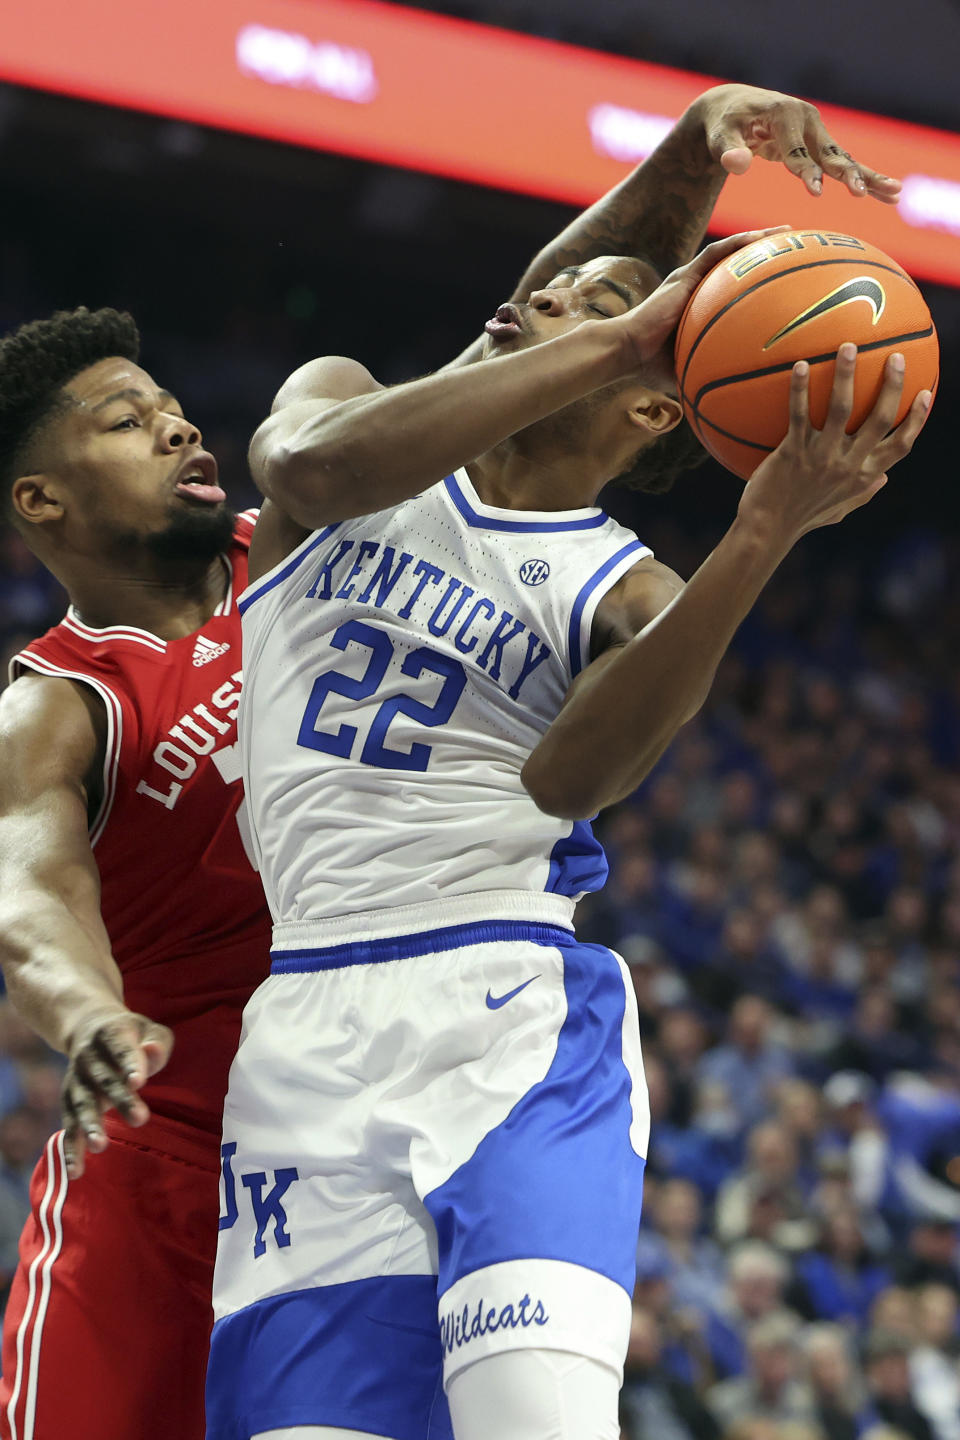 Kentucky's Cason Wallace (22) tries to shoot as Louisville's Sydney Curry (21) defends during the first half of an NCAA college basketball game in Lexington, Ky., Saturday, Dec. 31, 2022. (AP Photo/James Crisp)